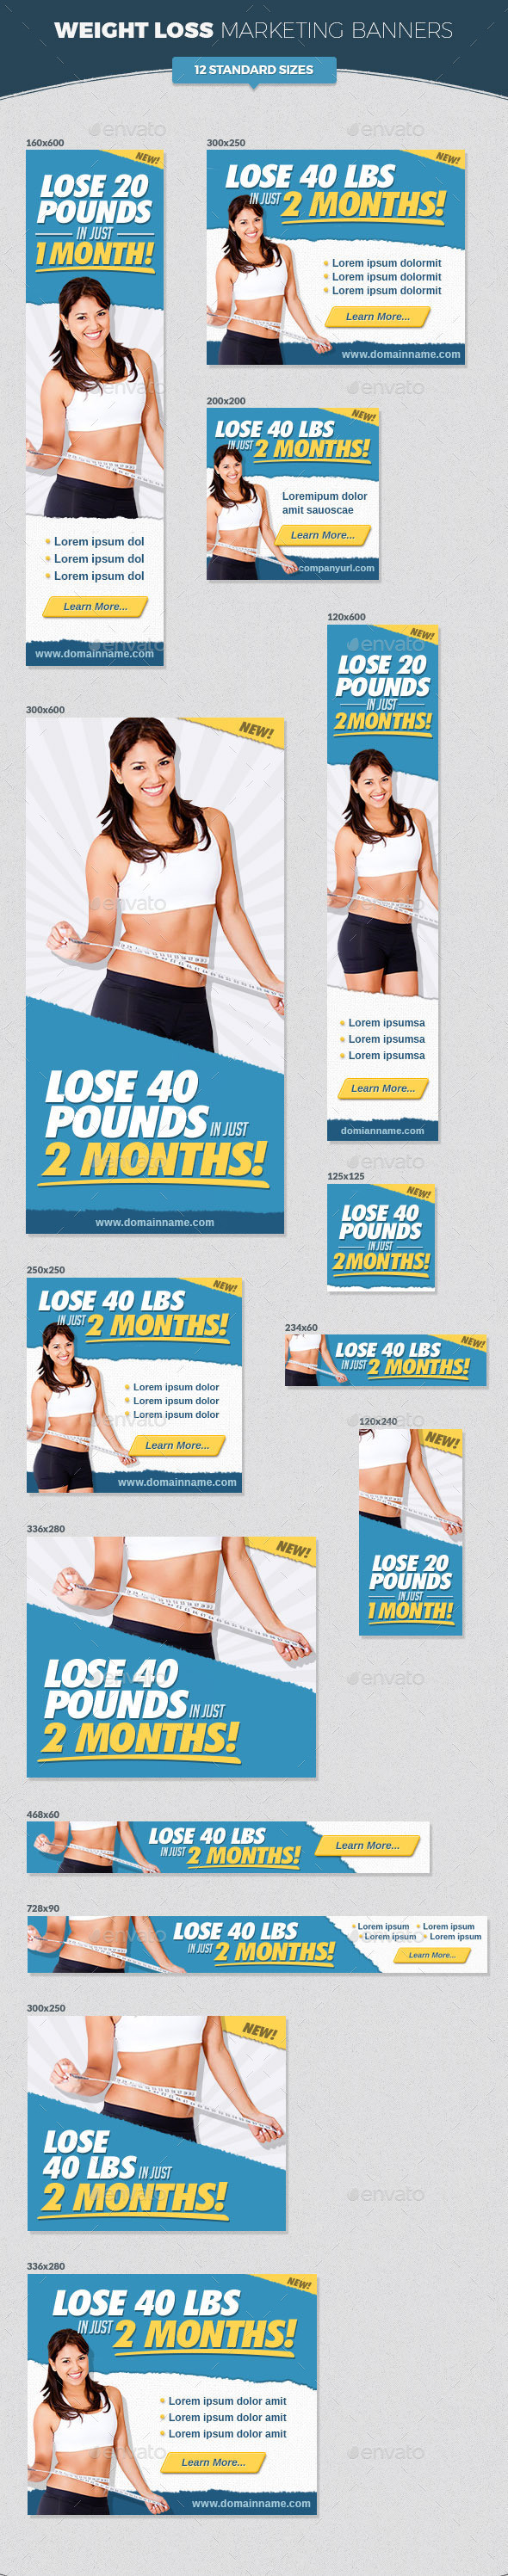 Preview weight loss marketing banners